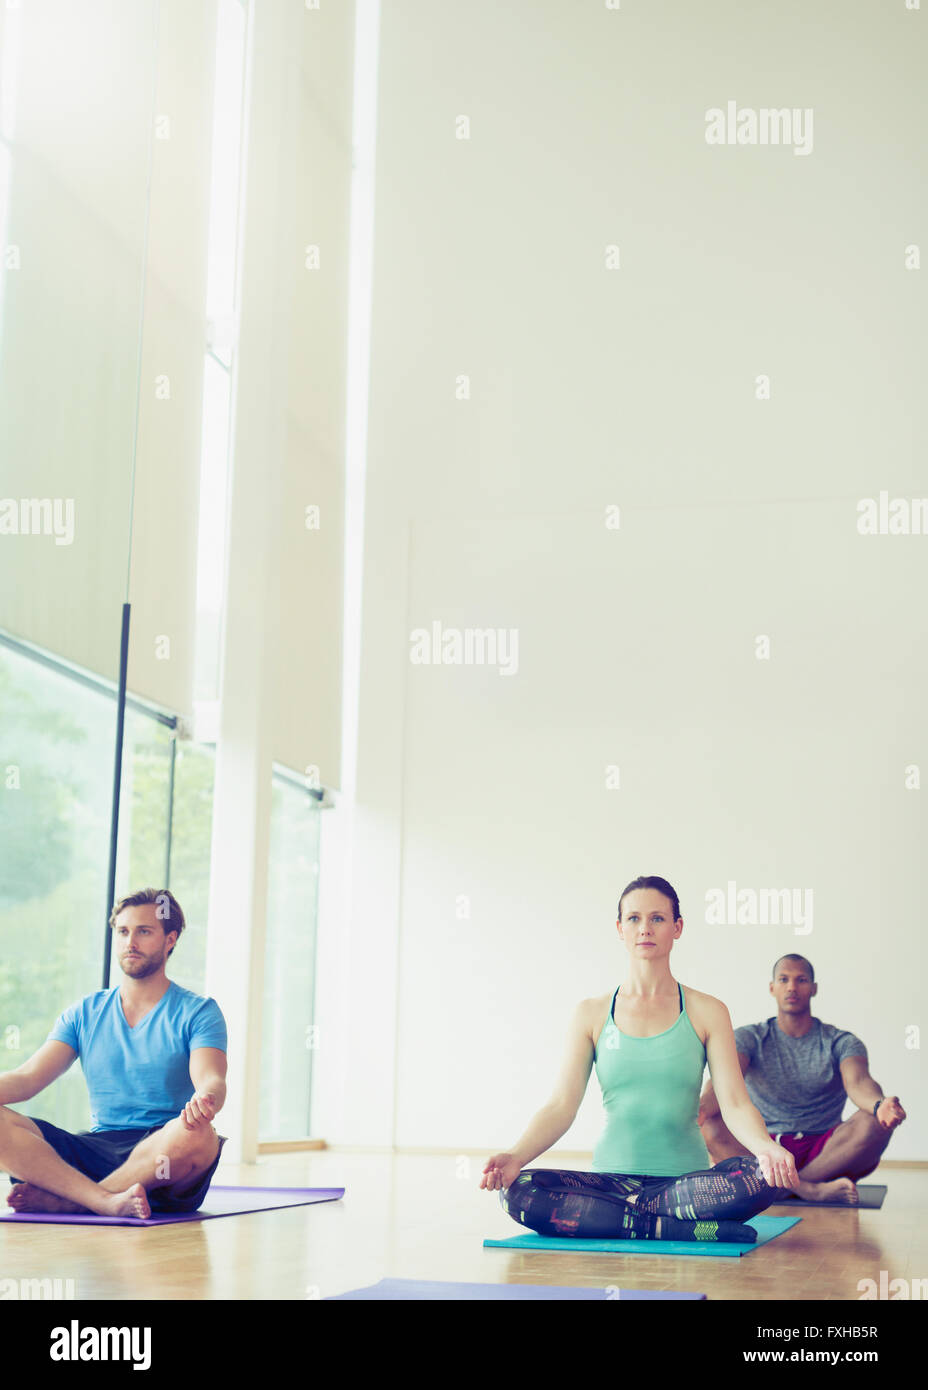 Yoga class sitting in lotus position Stock Photo